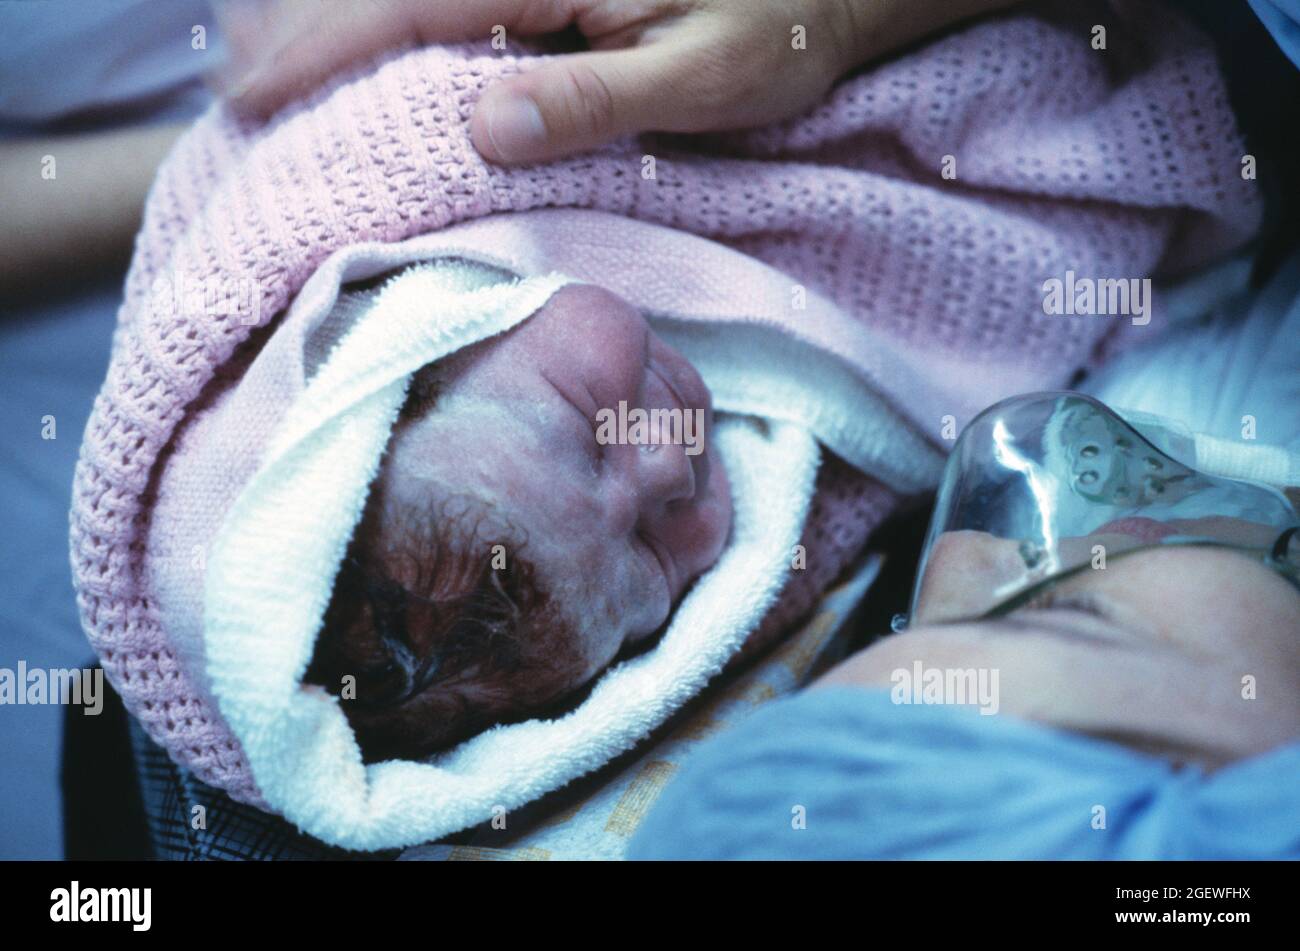 Medical hospital. Childbirth. Close up of newly born baby in mother's arms. Stock Photo